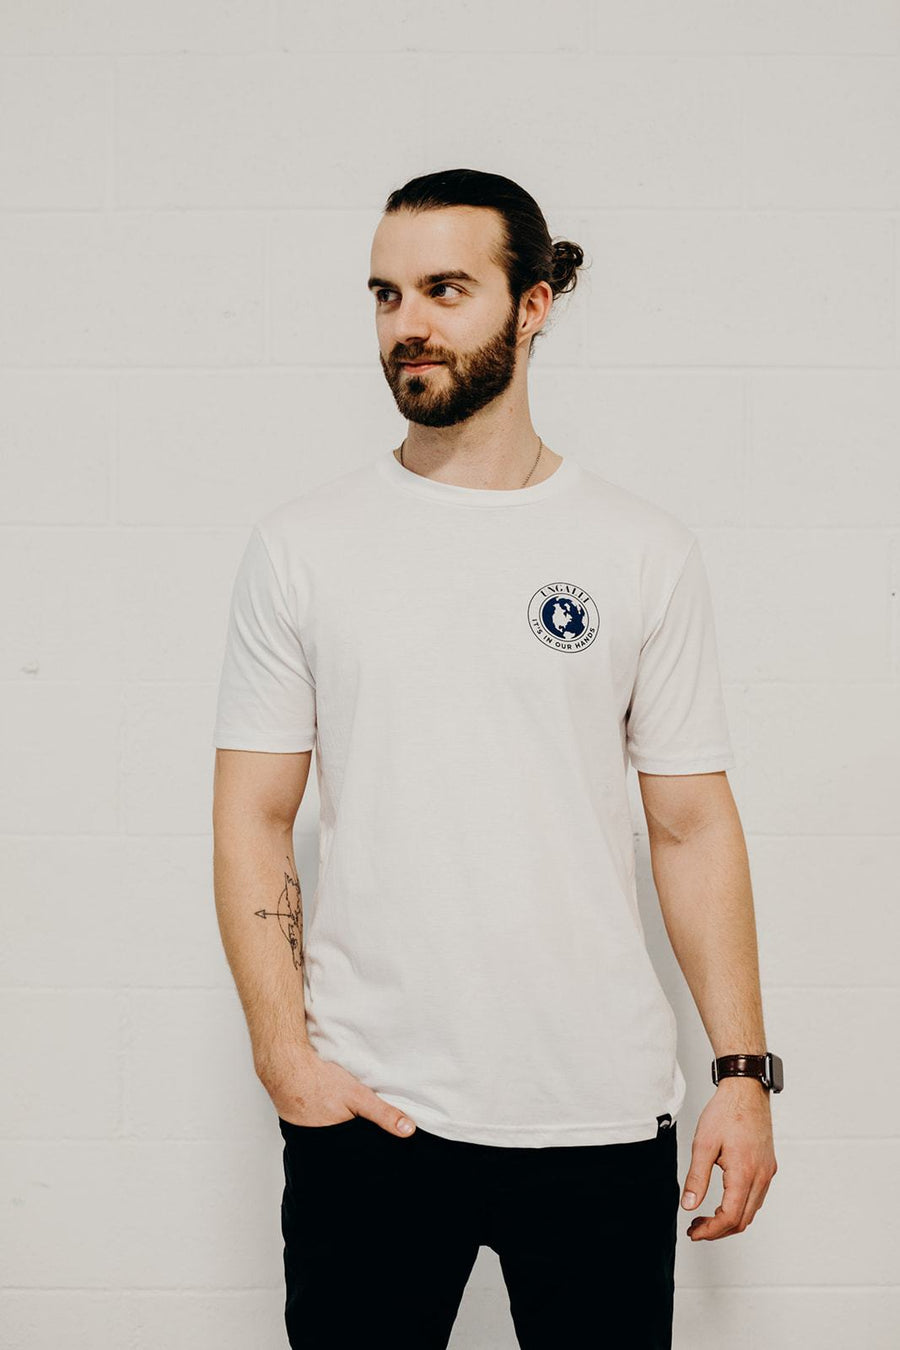 White organic short sleeve unisex t-shirt with blue "it's in our hands" Ungalli logo on front and across back